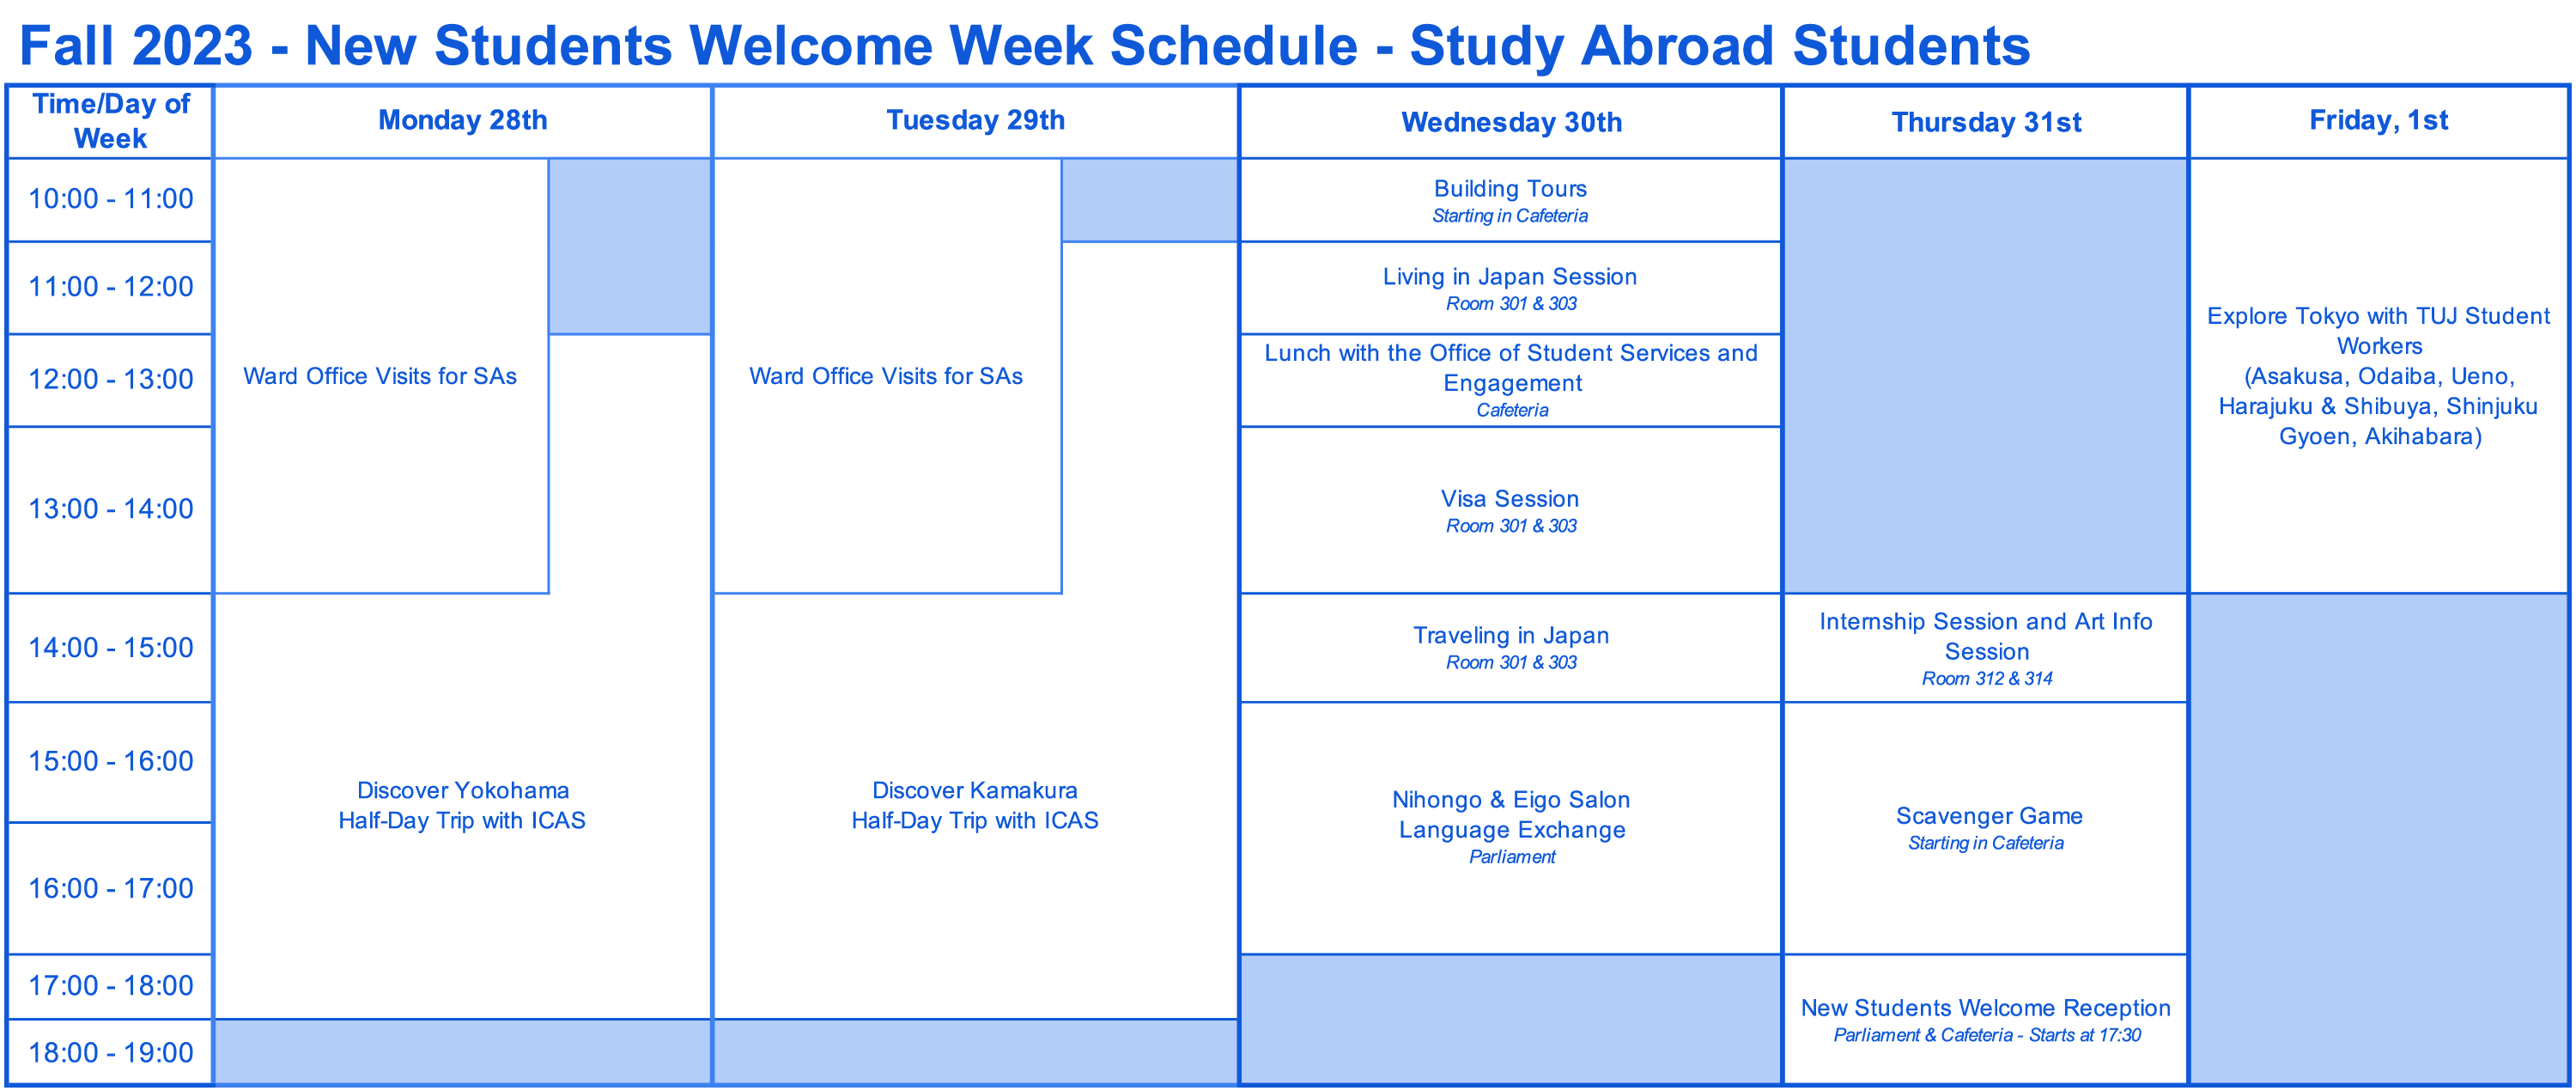 Spring 2023 - New Students Welcome Week Schedule